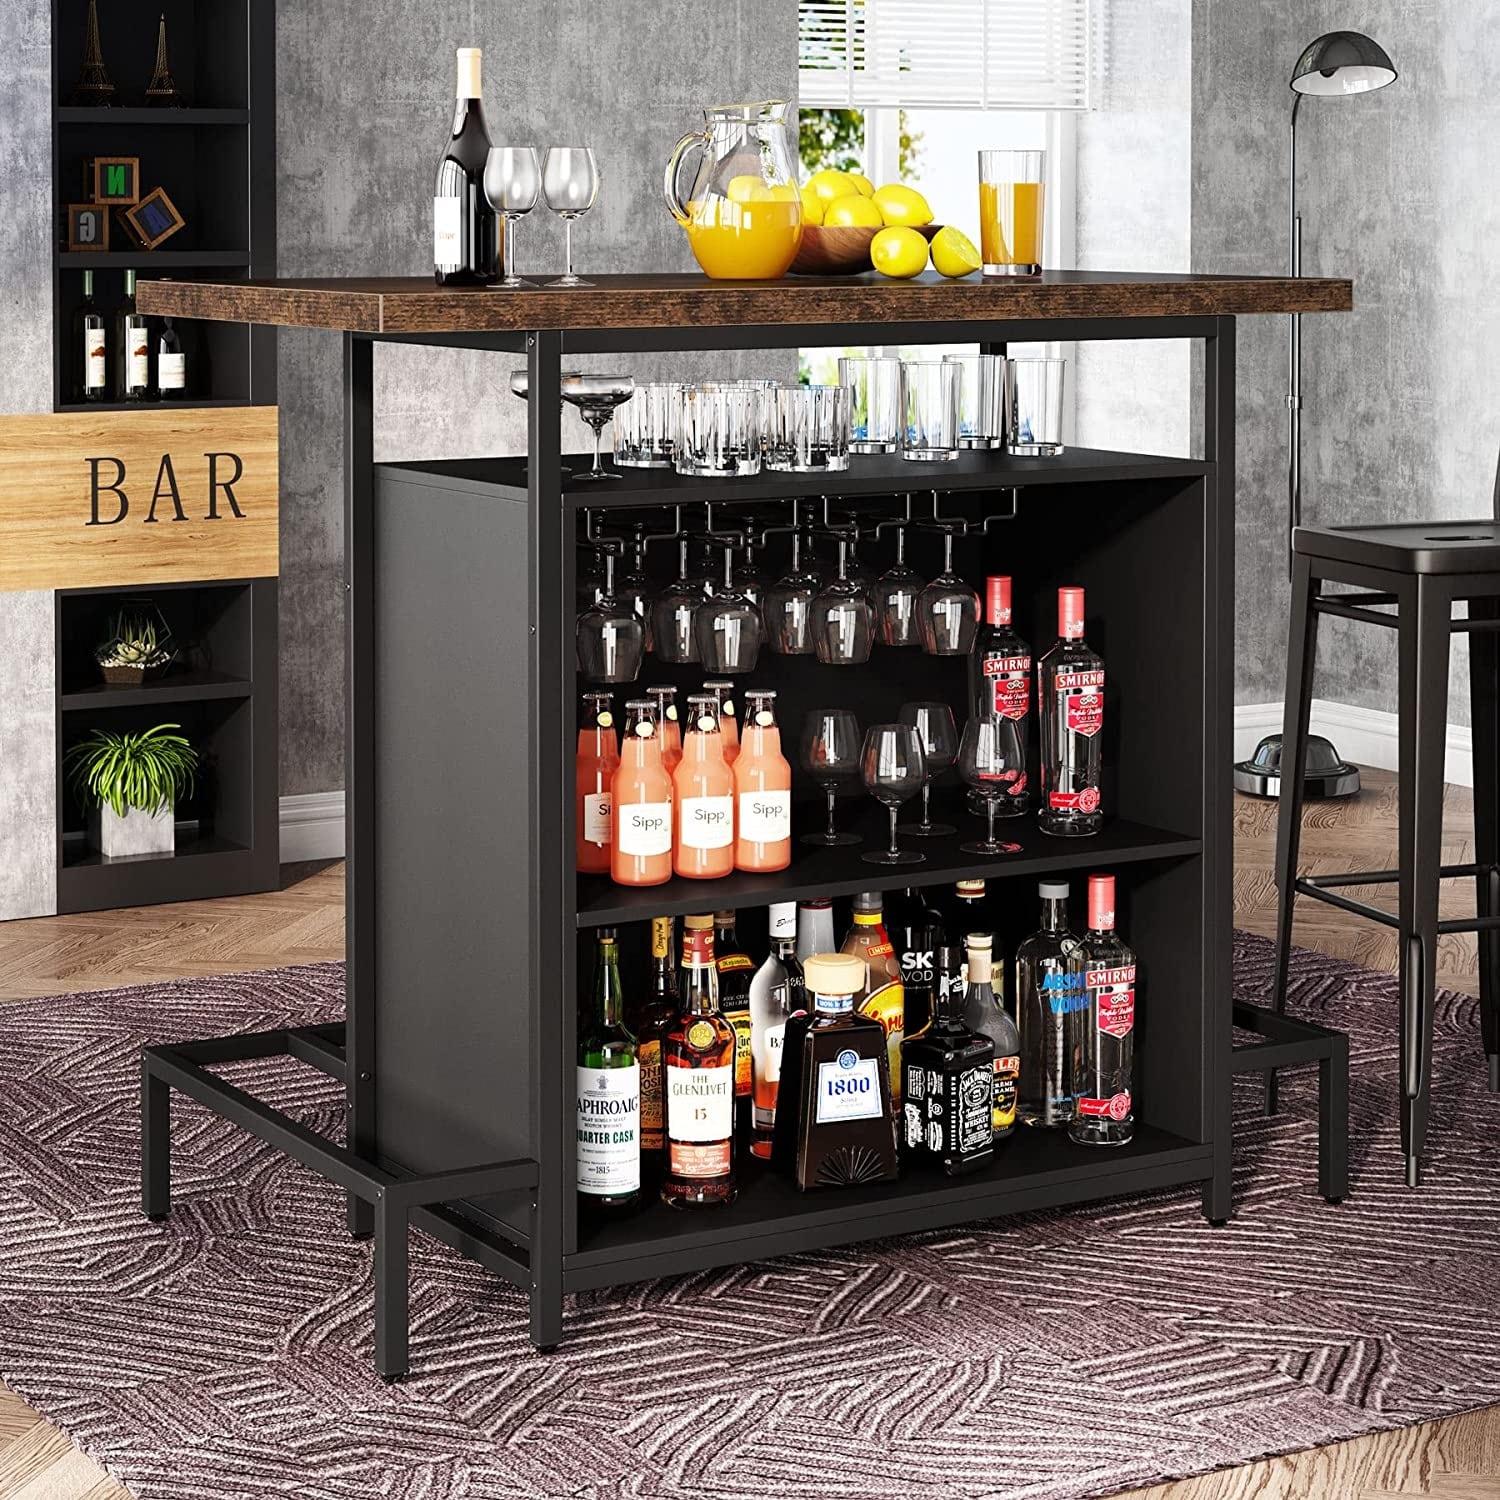 https://ak1.ostkcdn.com/images/products/is/images/direct/09ed7f6ad977a47f52e36512cf604170921a2c8c/Home-Bar-Unit%2C-Industrial-3-Tier-Liquor-Bar-Table-with-Glasses-Holder.jpg